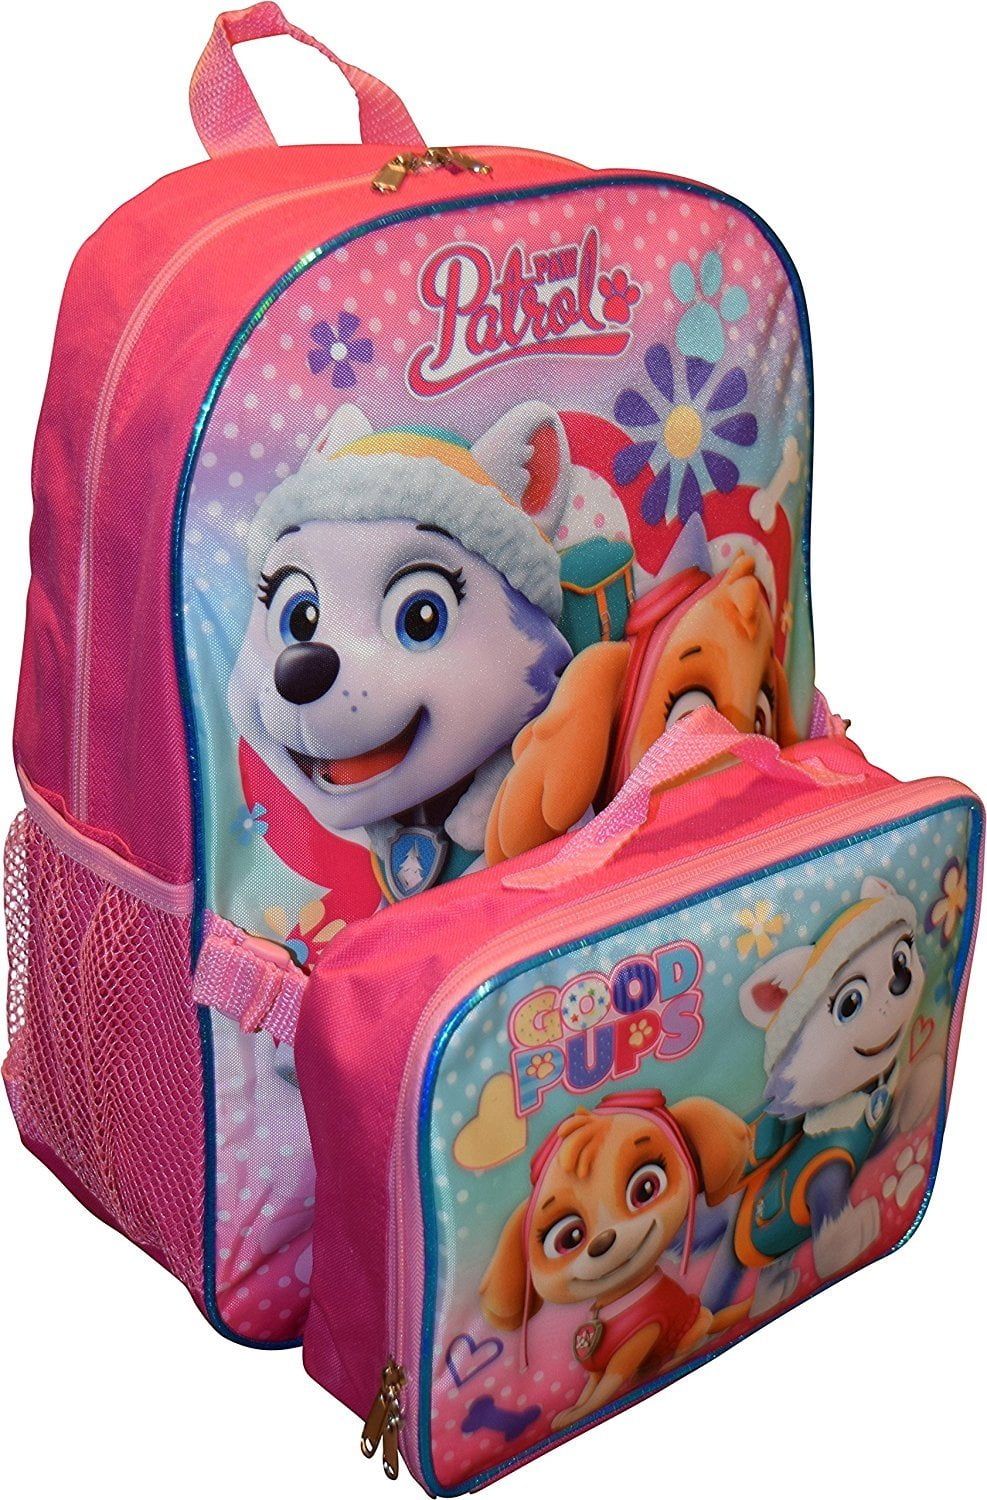 Paw Patrol Skye Everest Insulated Lunch Bag Girls Pink